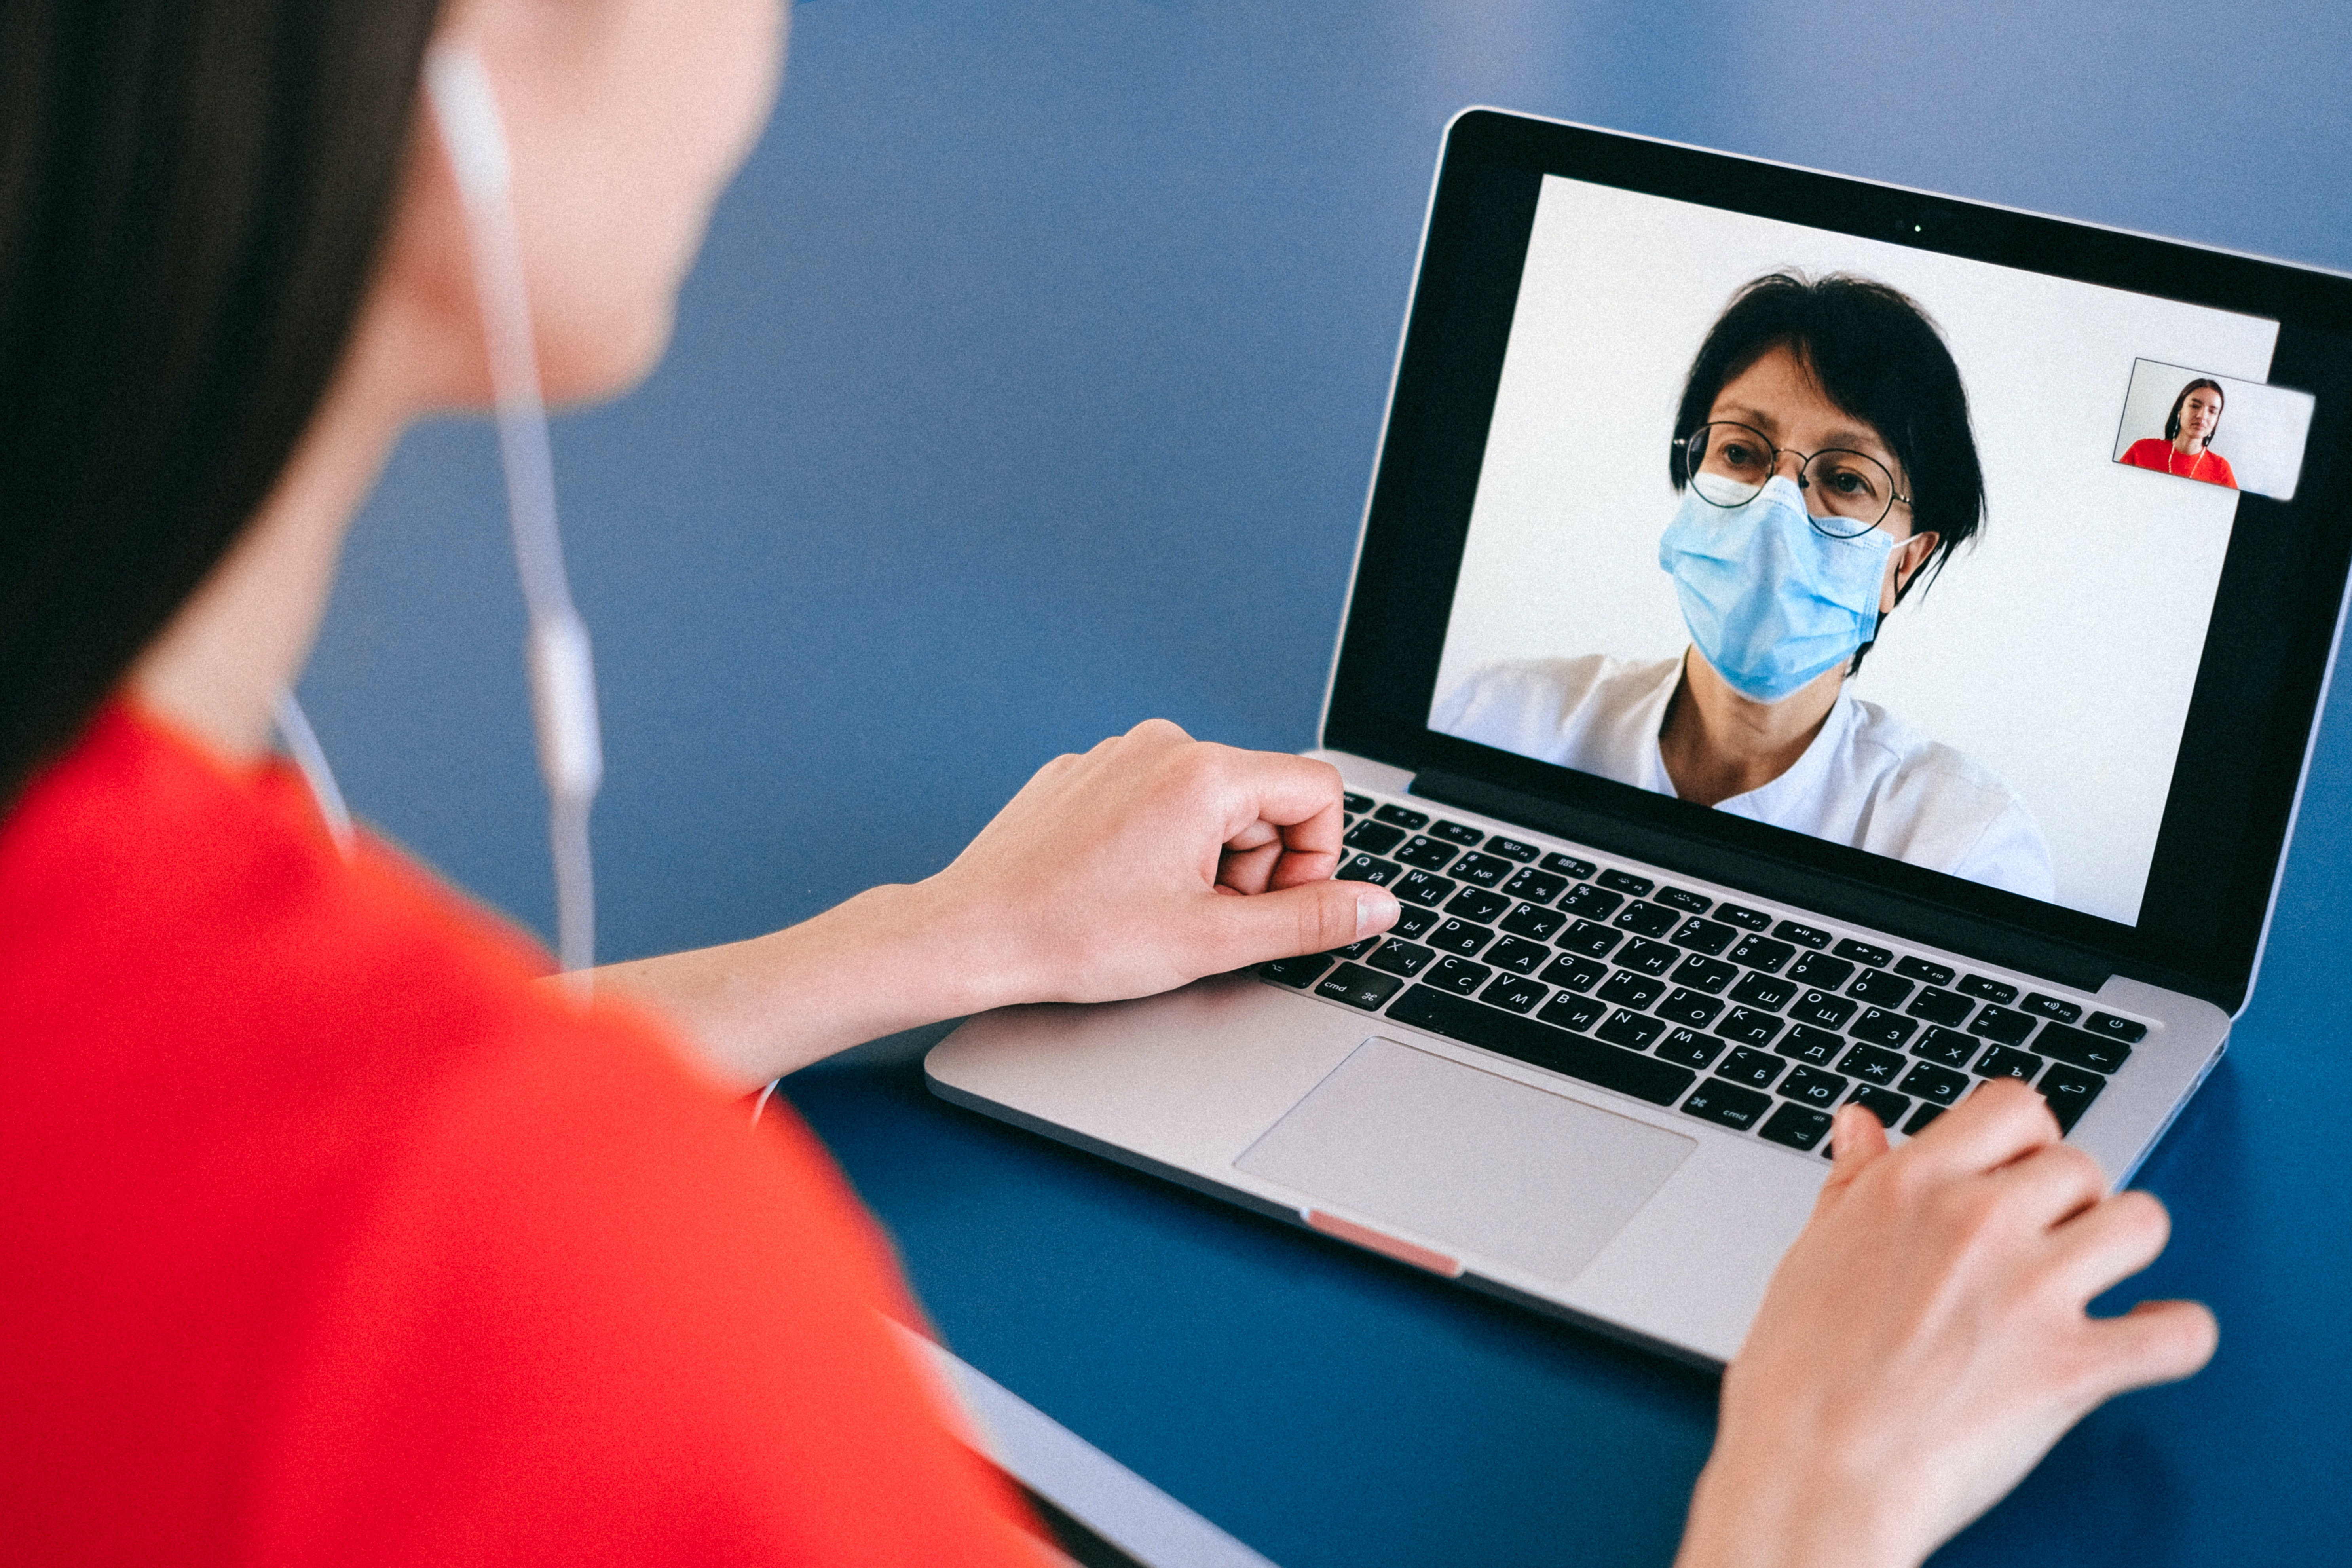 A person on a telehealth appointment with a health professional